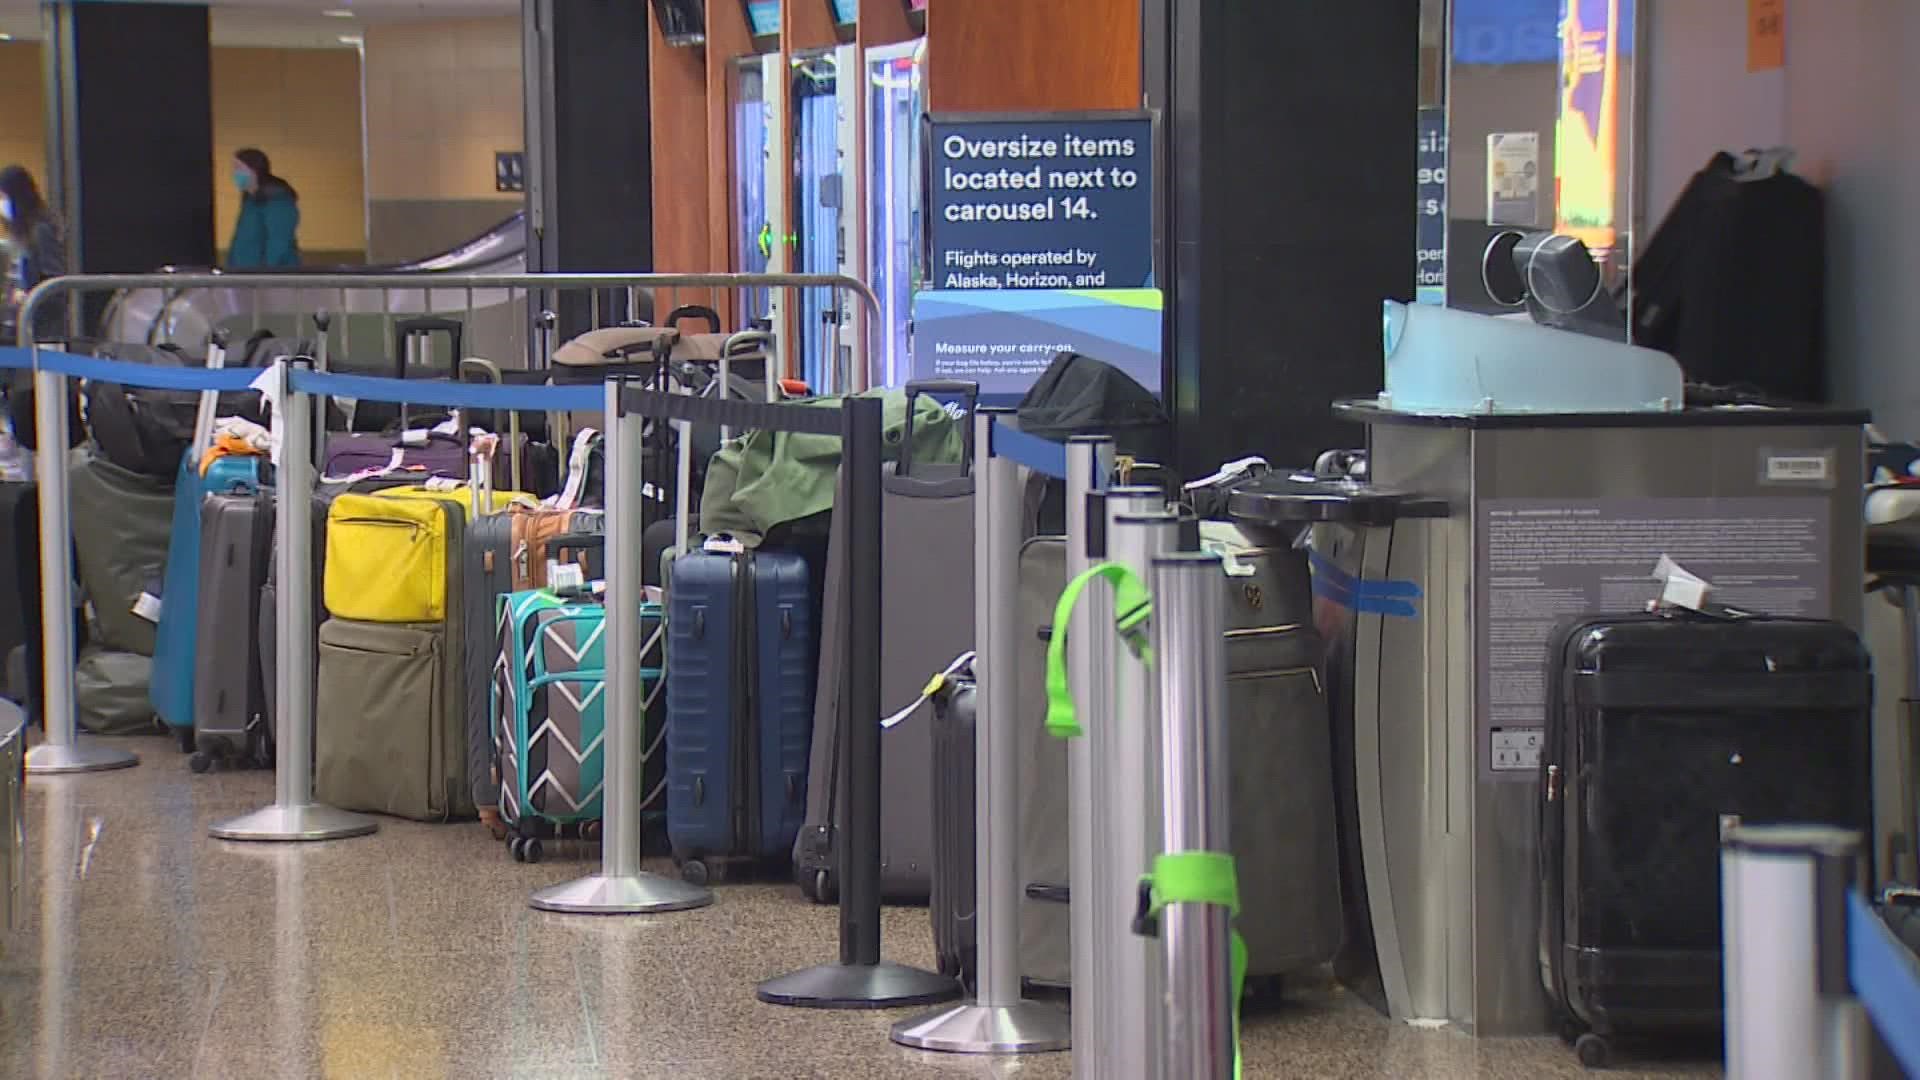 Inclement weather and canceled flights lead to passengers being separated from their luggage. Hundreds of those bags remain waiting at Sea-Tac airport.